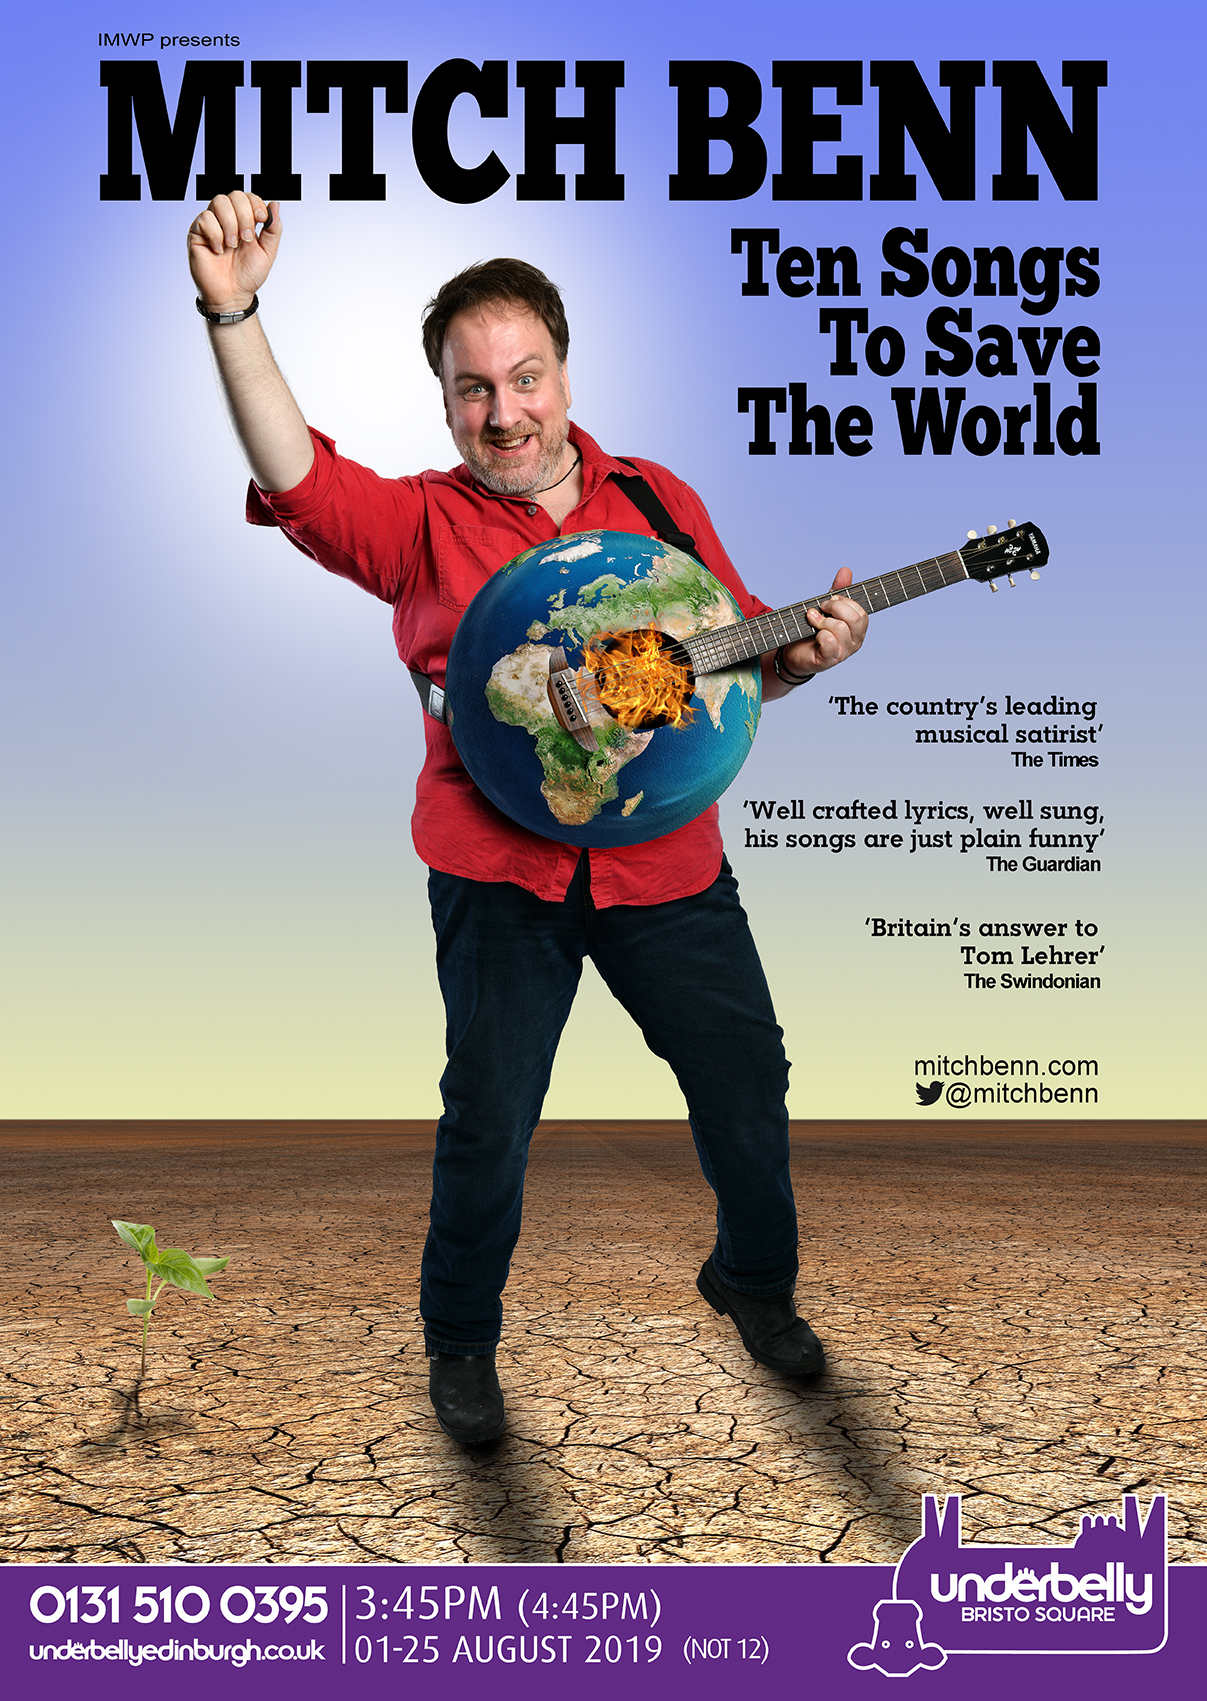 The poster for Mitch Benn: Ten Songs to Save the World